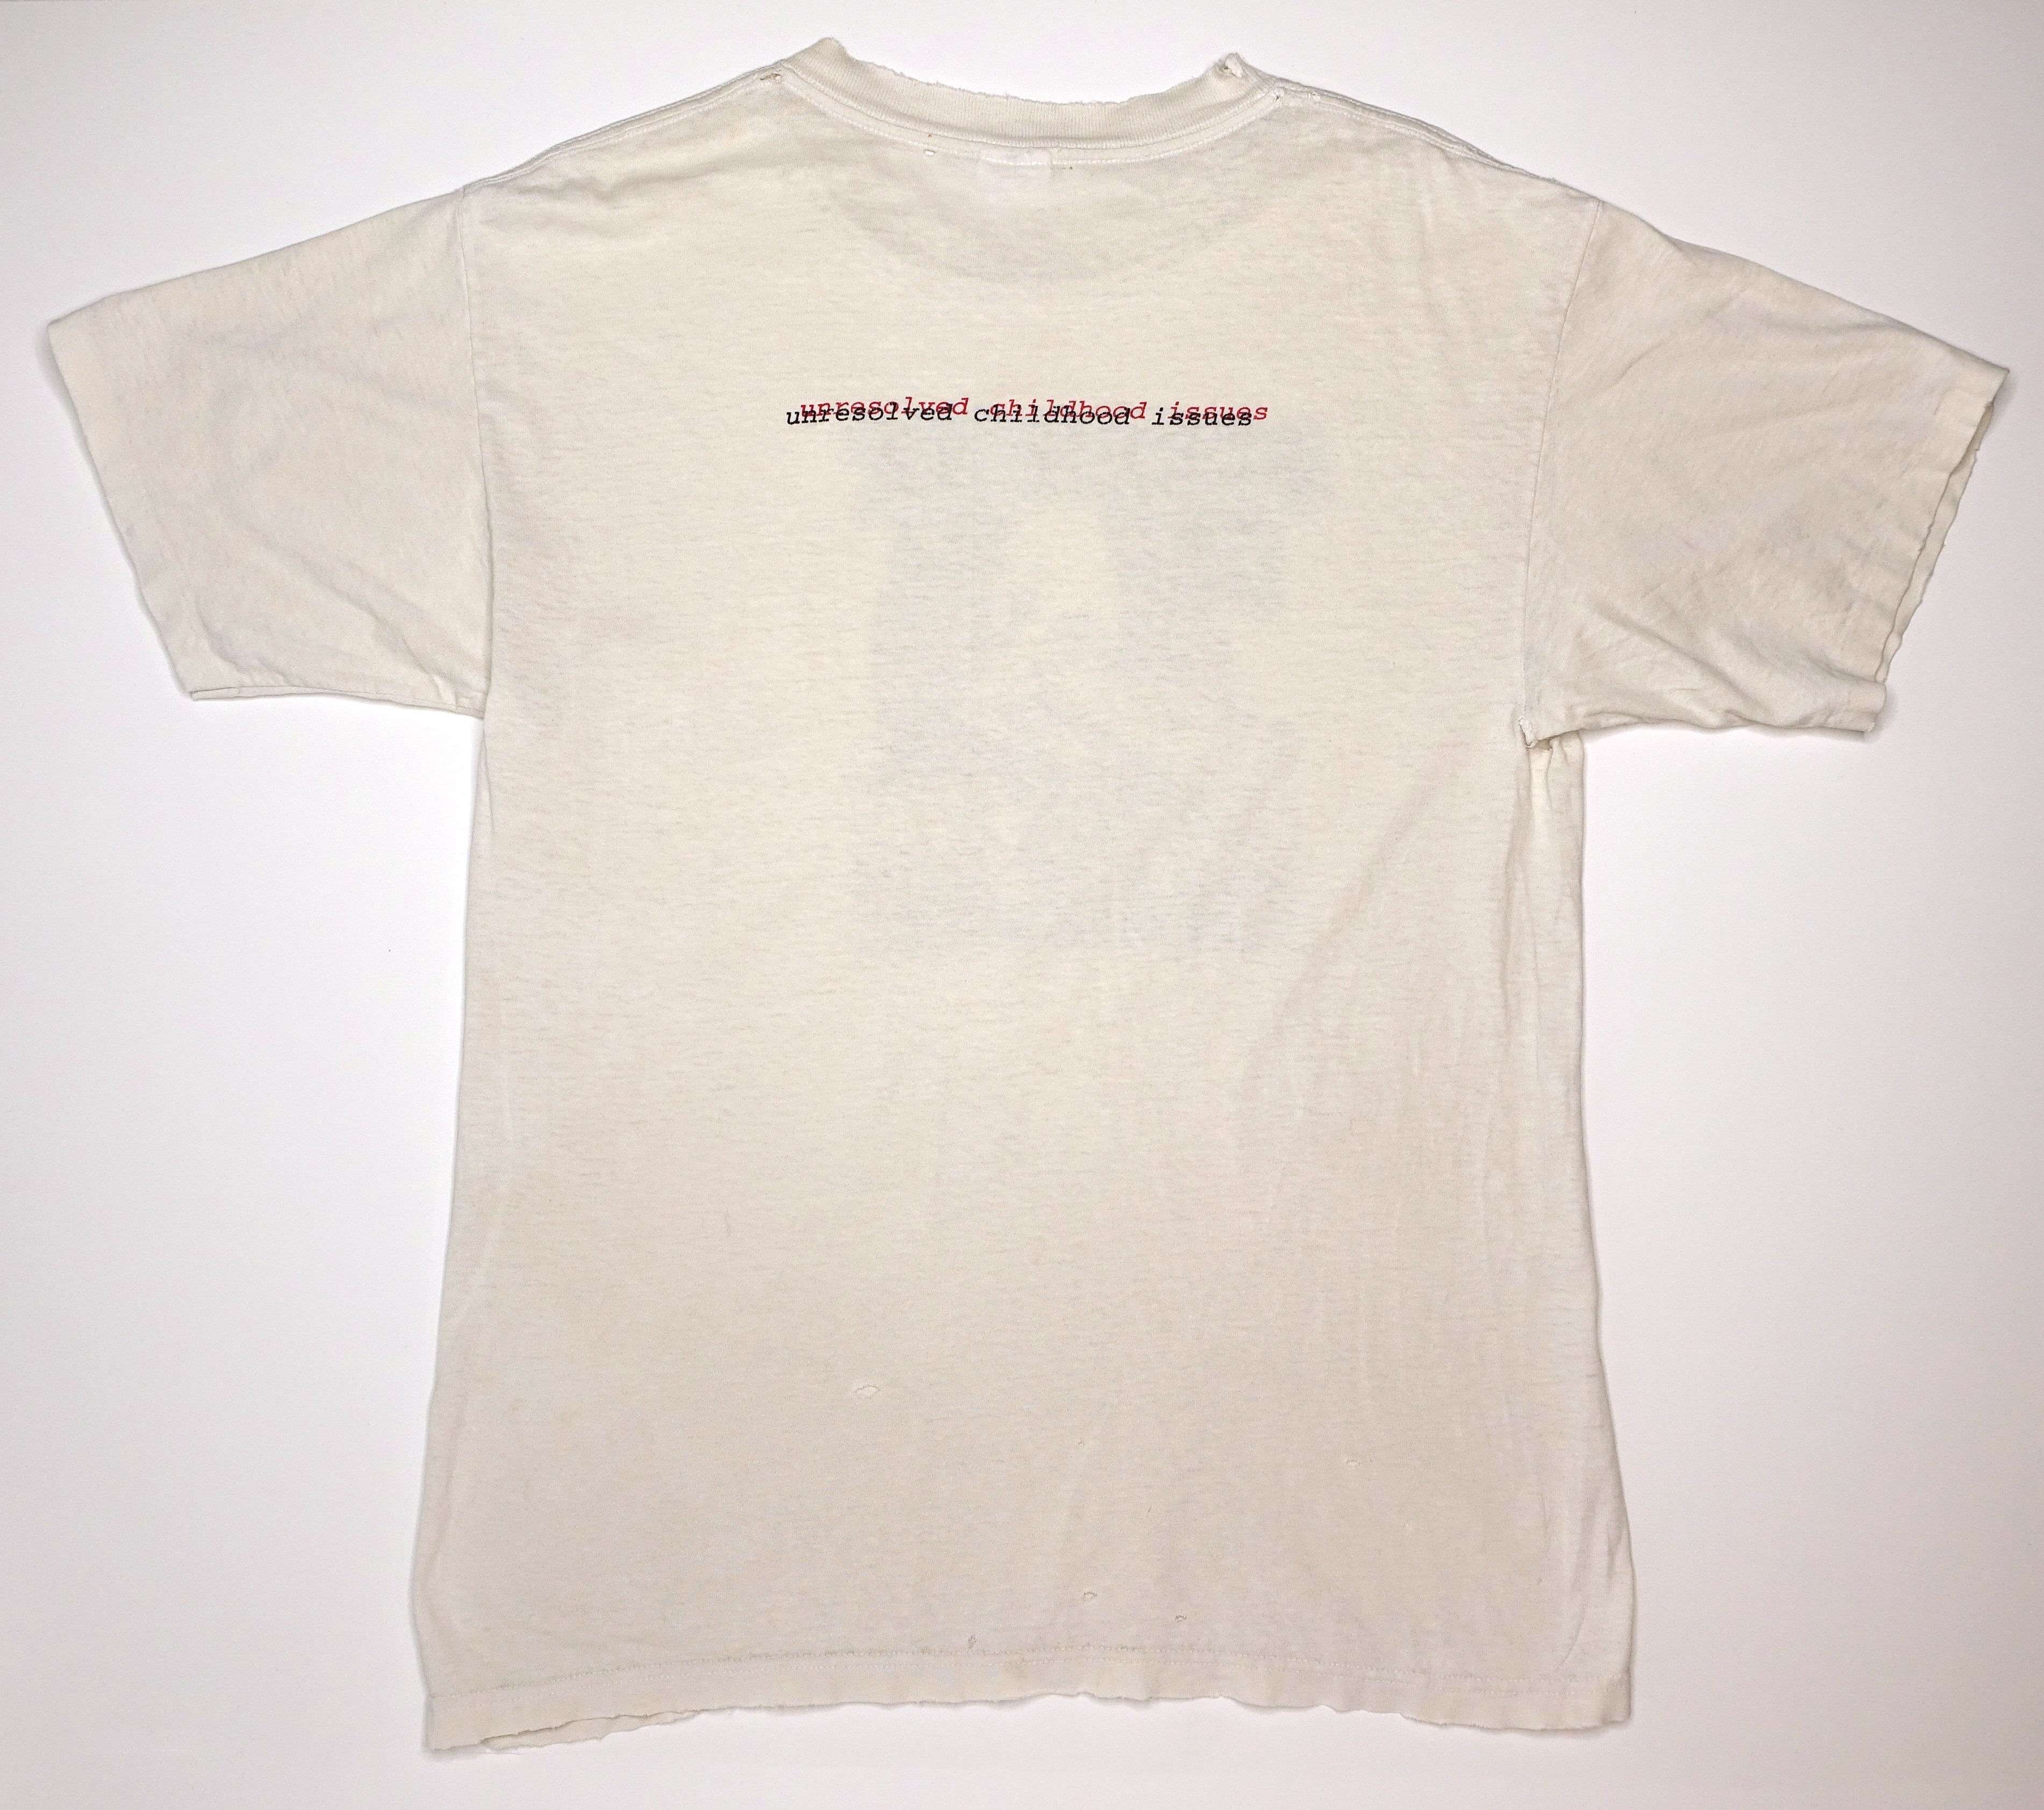 Screw 32 ‎– Unresolved Childhood Issues 1995 Tour Shirt Size Large